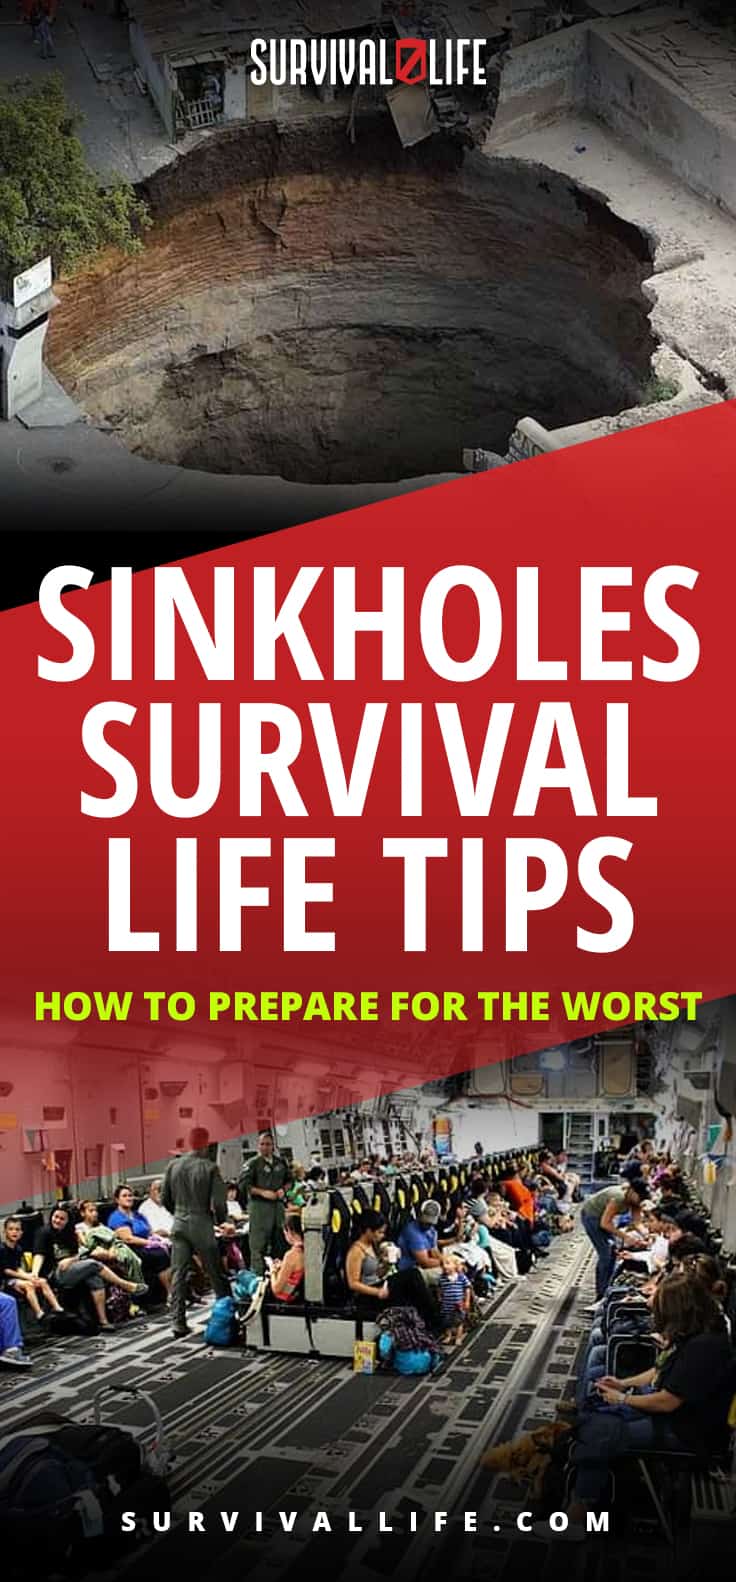 Sinkholes Survival Life Tips | How To Prepare For The Worst | https://survivallife.com/sinkholes-survival-tips/